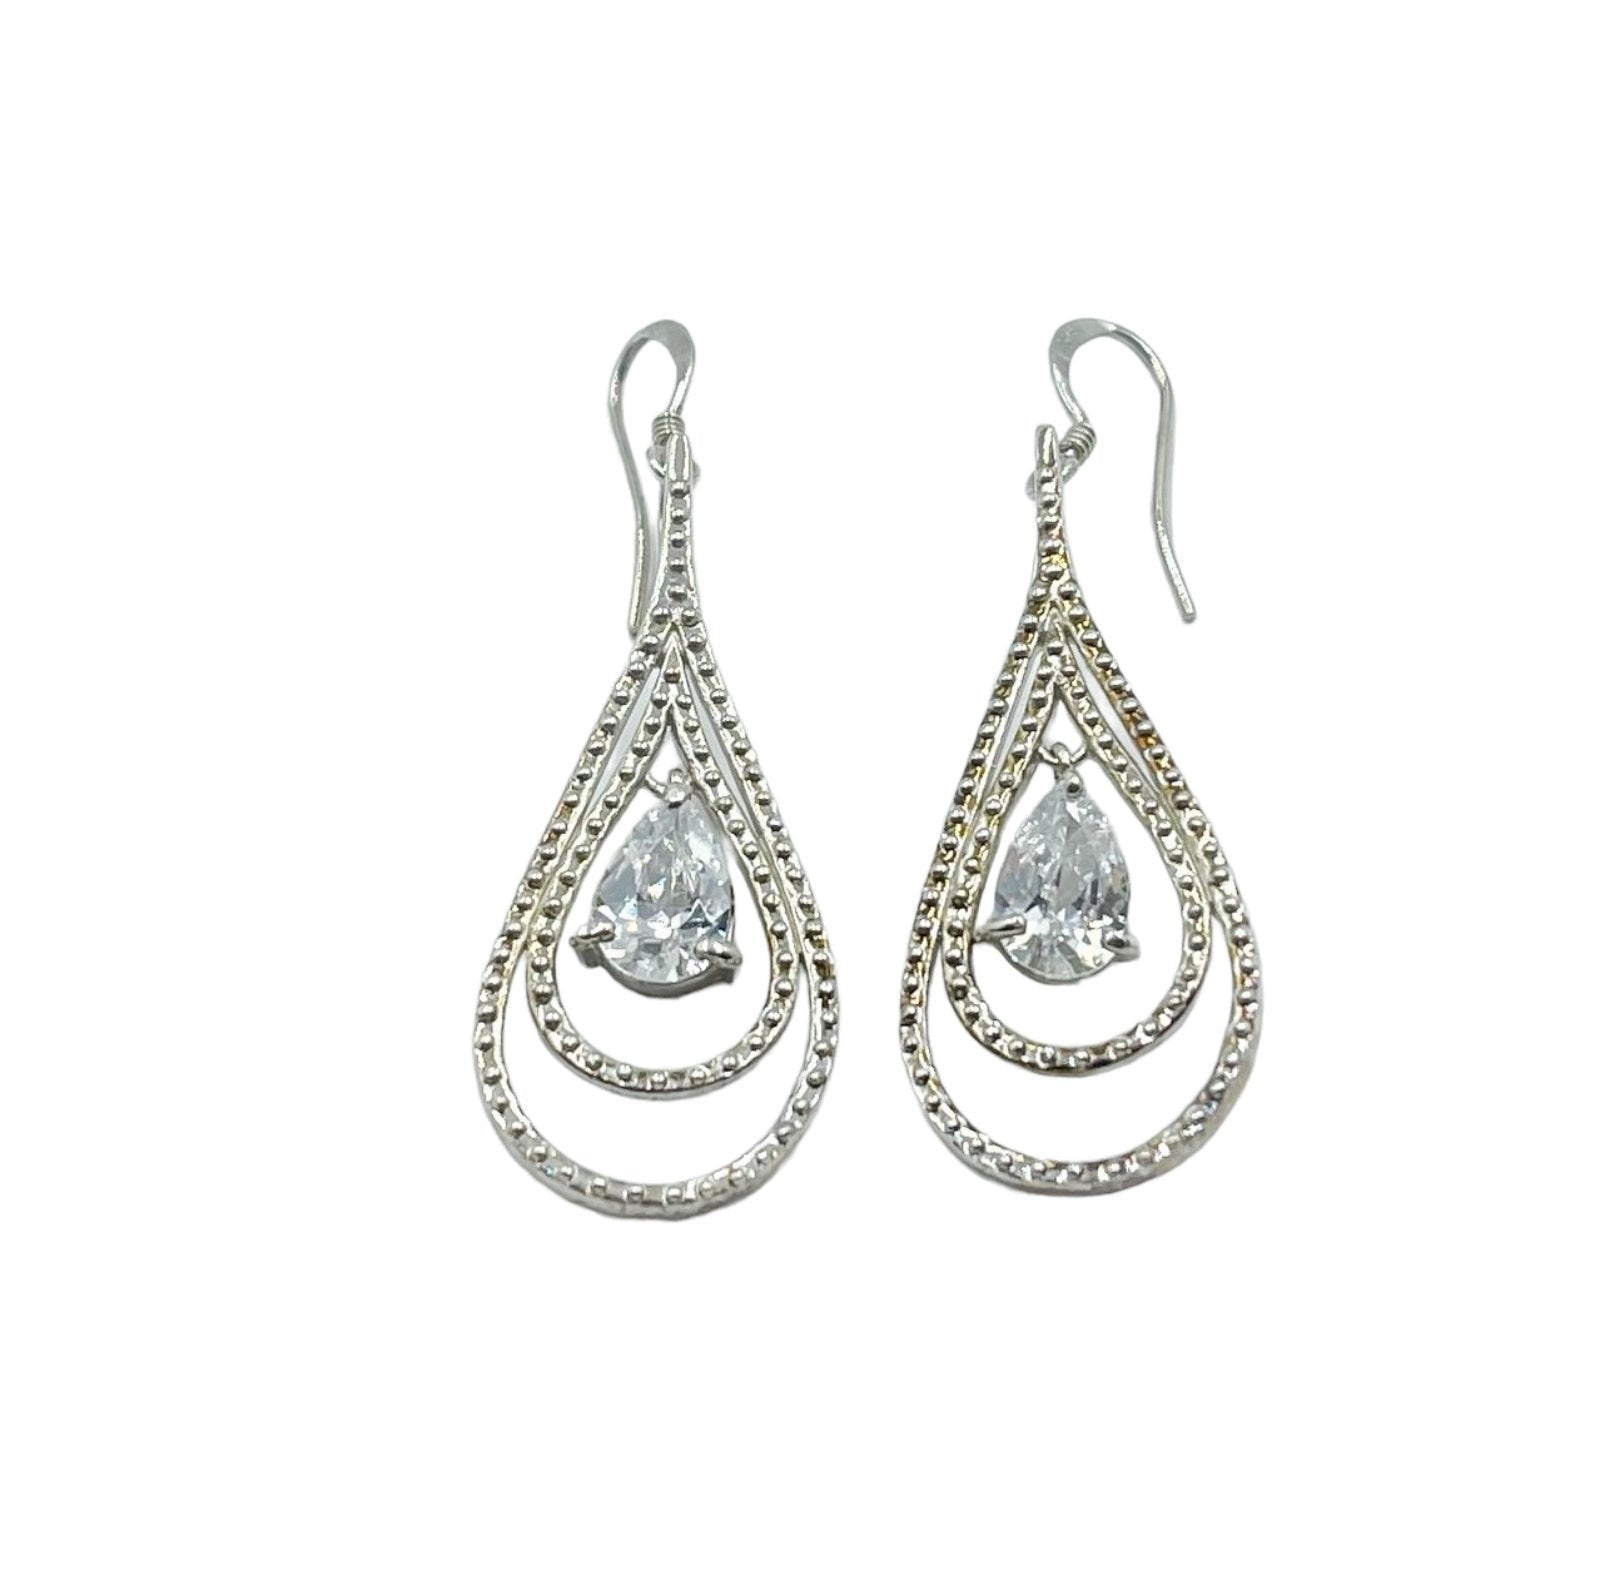 Sterling silver earrings with pear shaped cubic zirconia